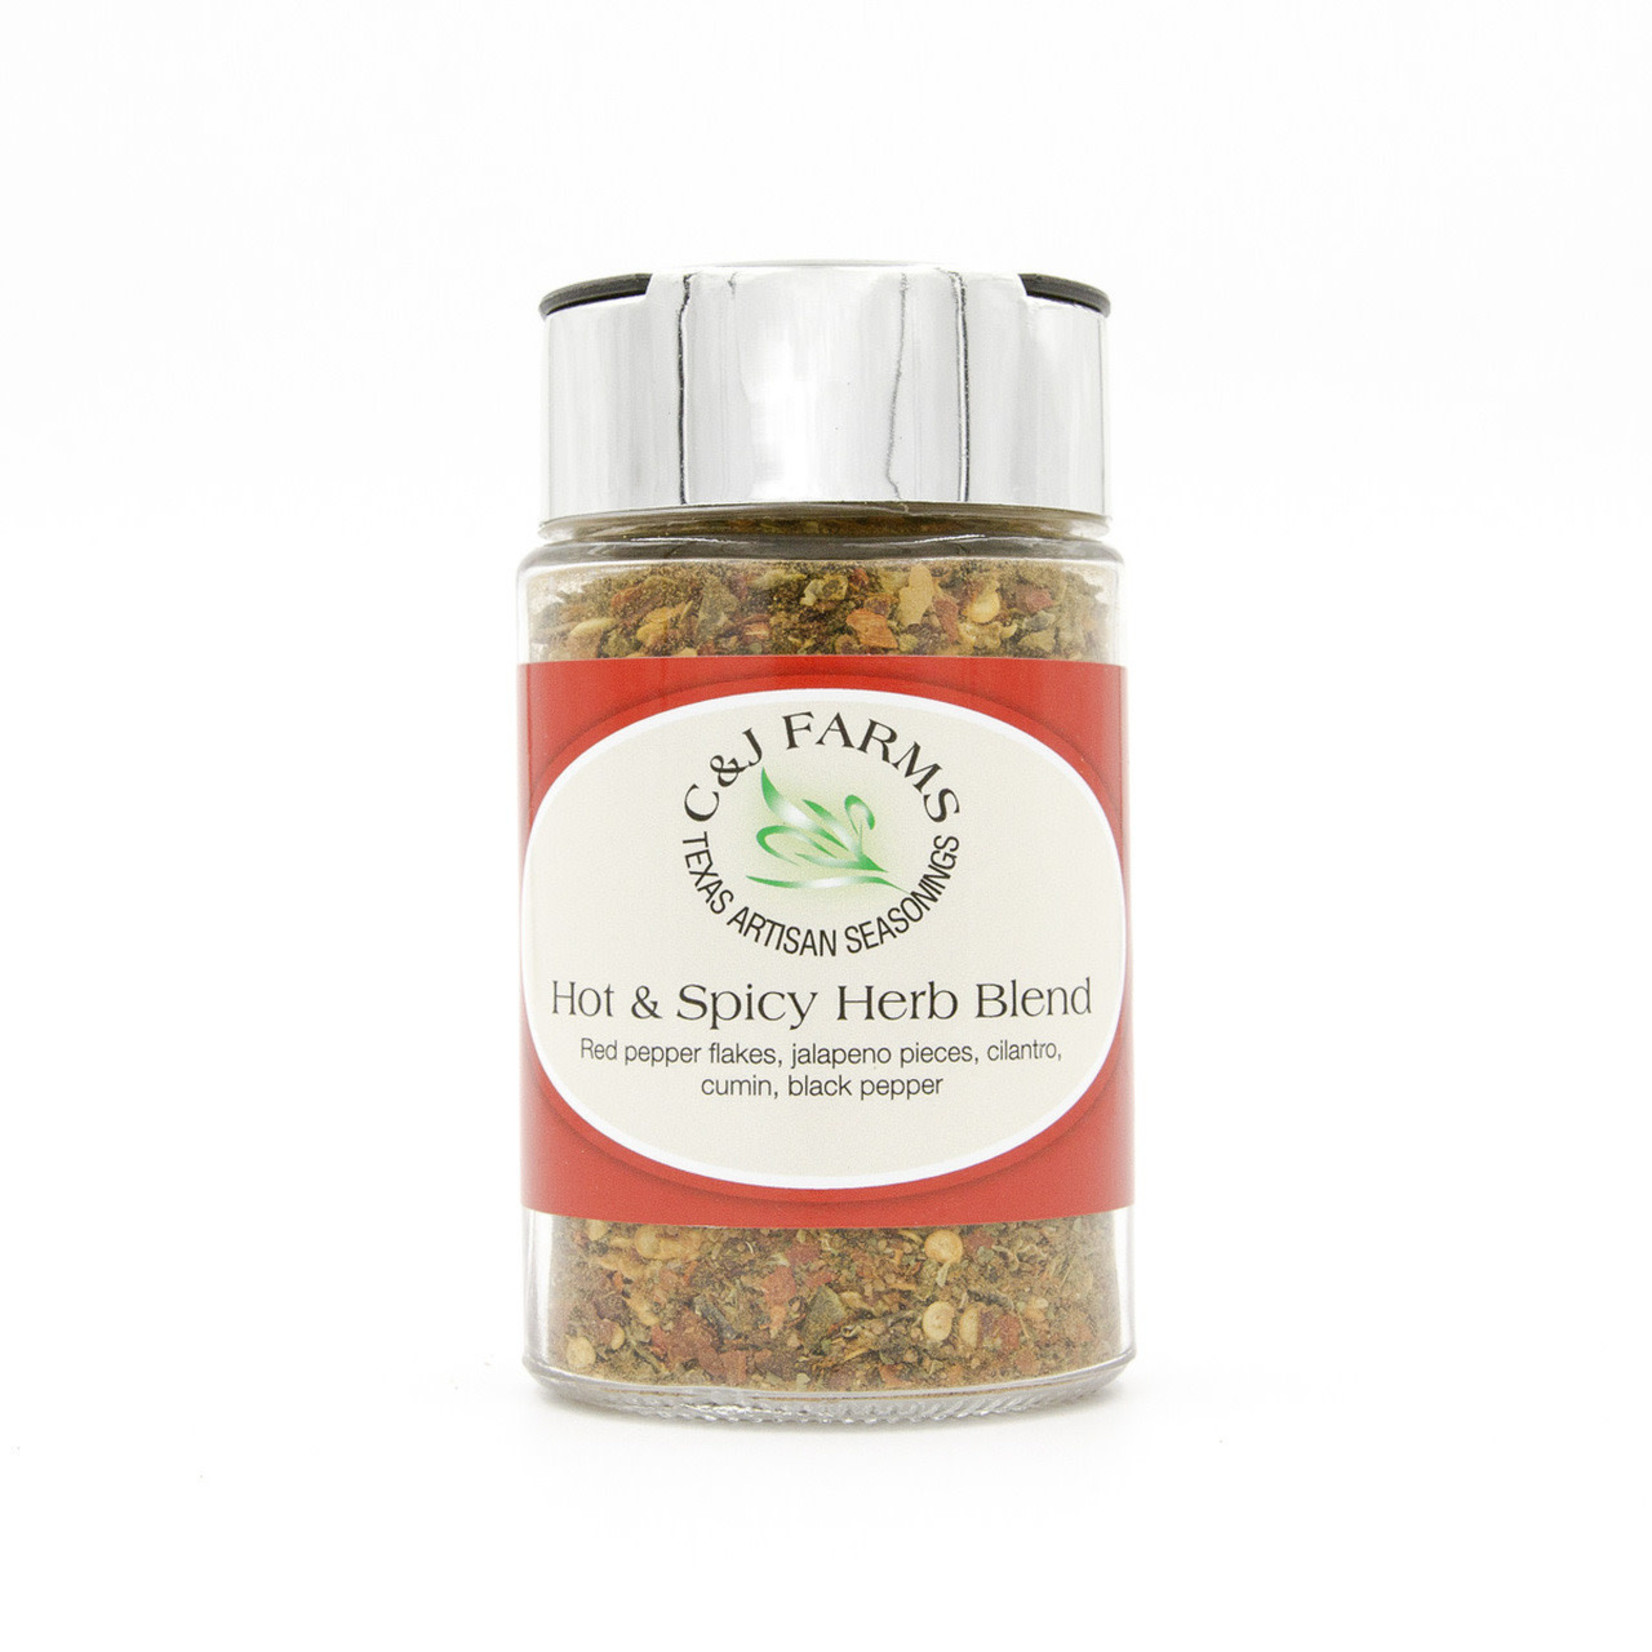 C & J Farms Hot & Spicy Blend